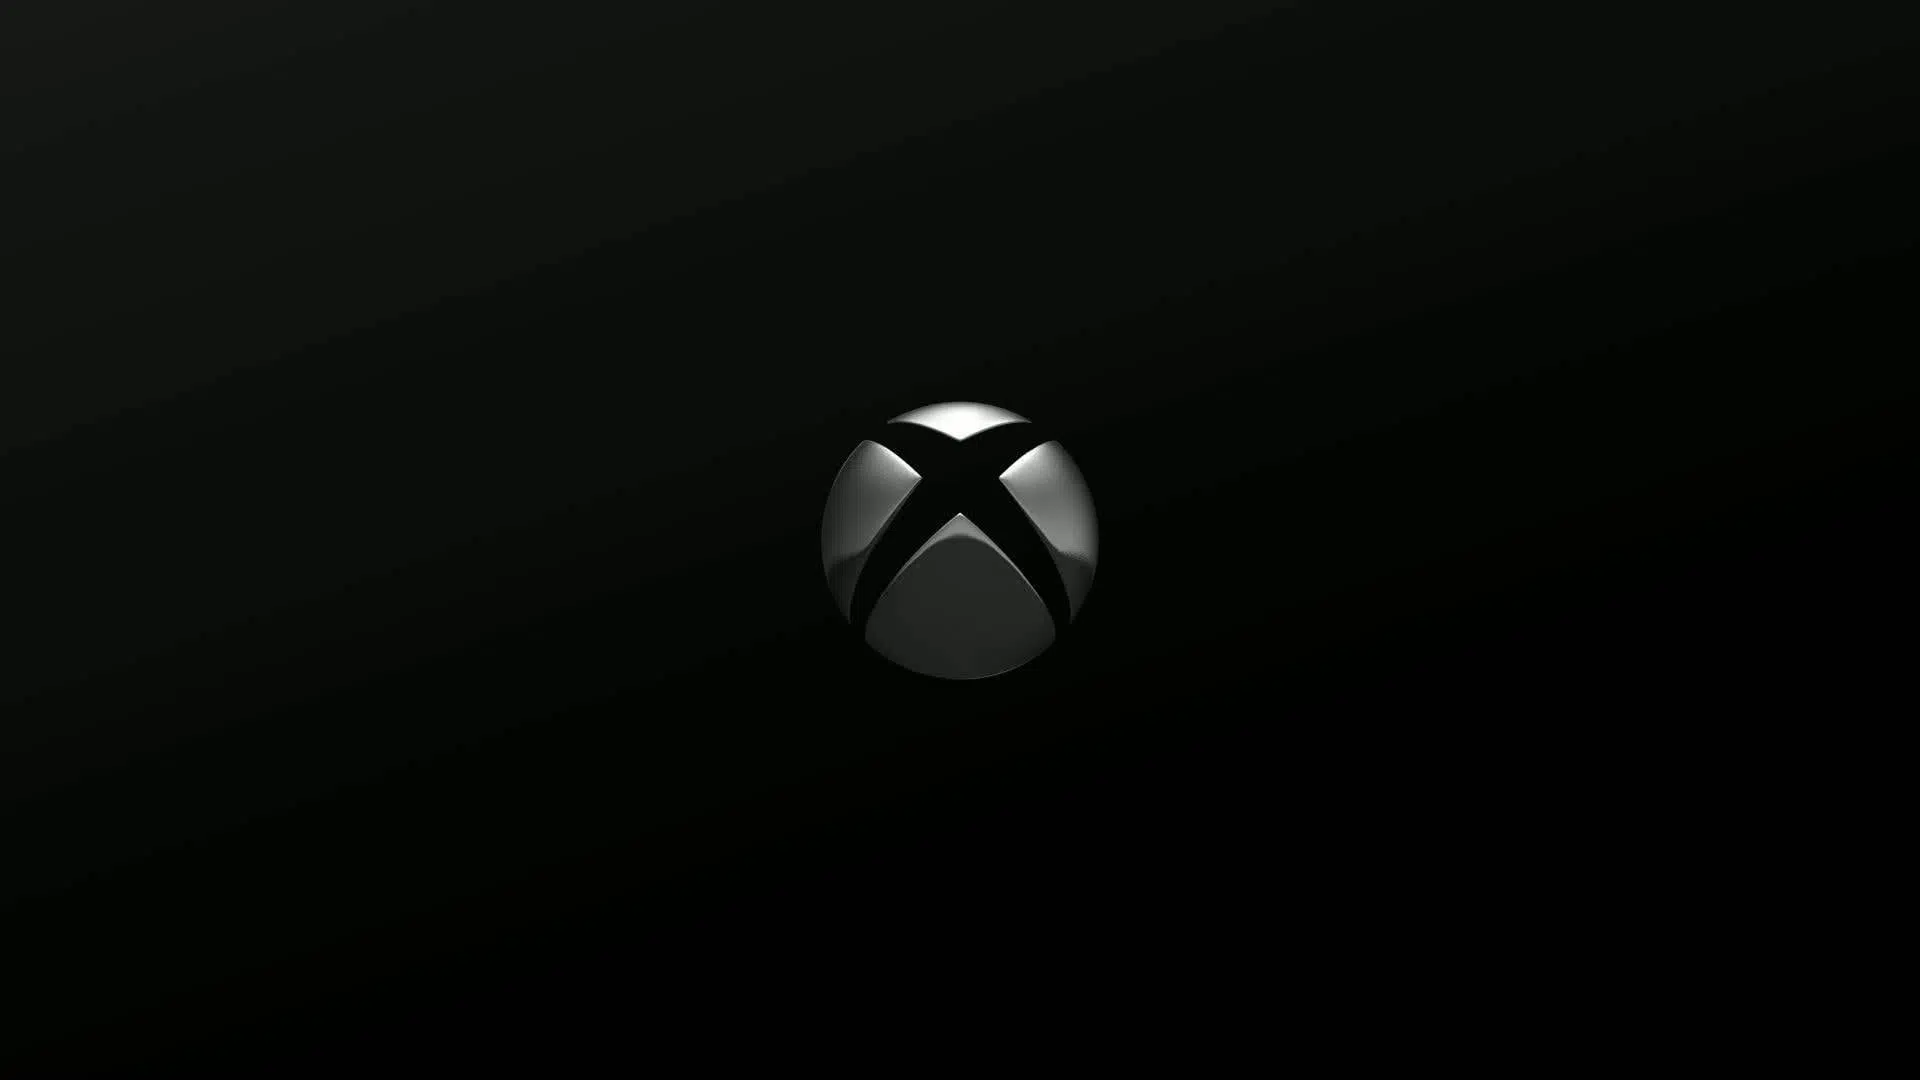 Xbox consoles have been updated to improve background personalisation and more